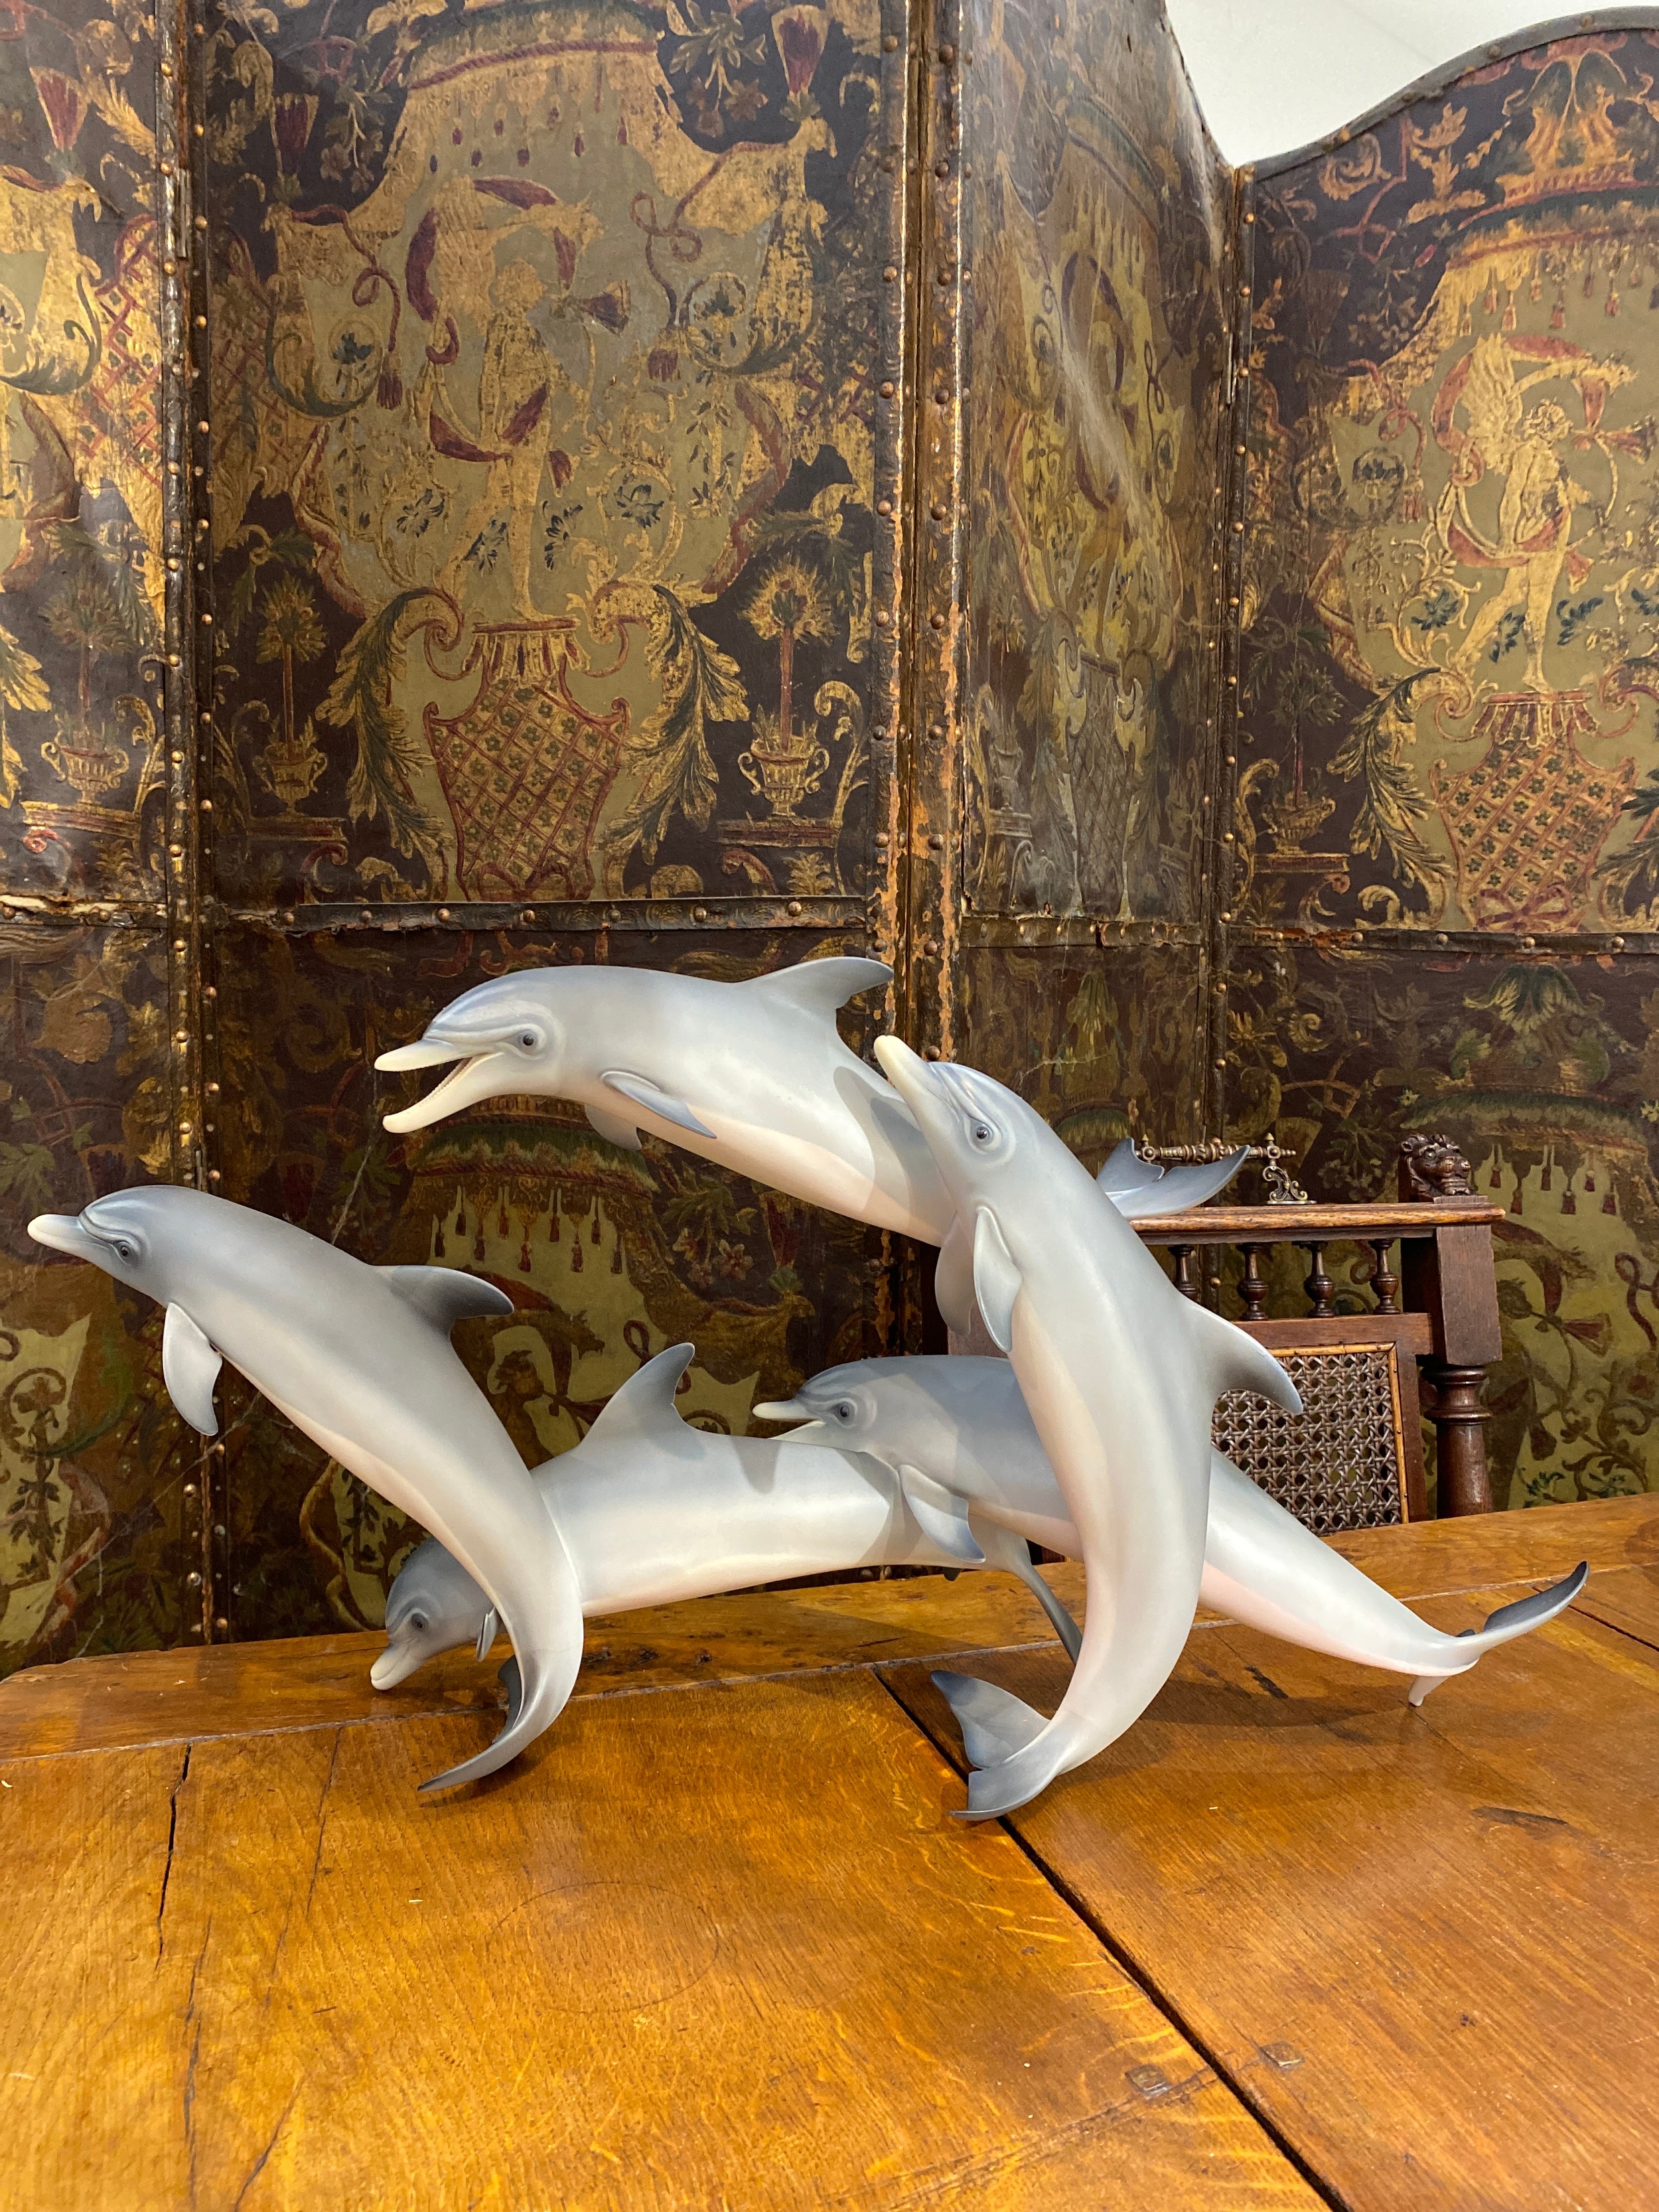 A figural group of dolphins by Hutschenreuther, limited edition 87/100, 33cm x 67cm - Image 3 of 3